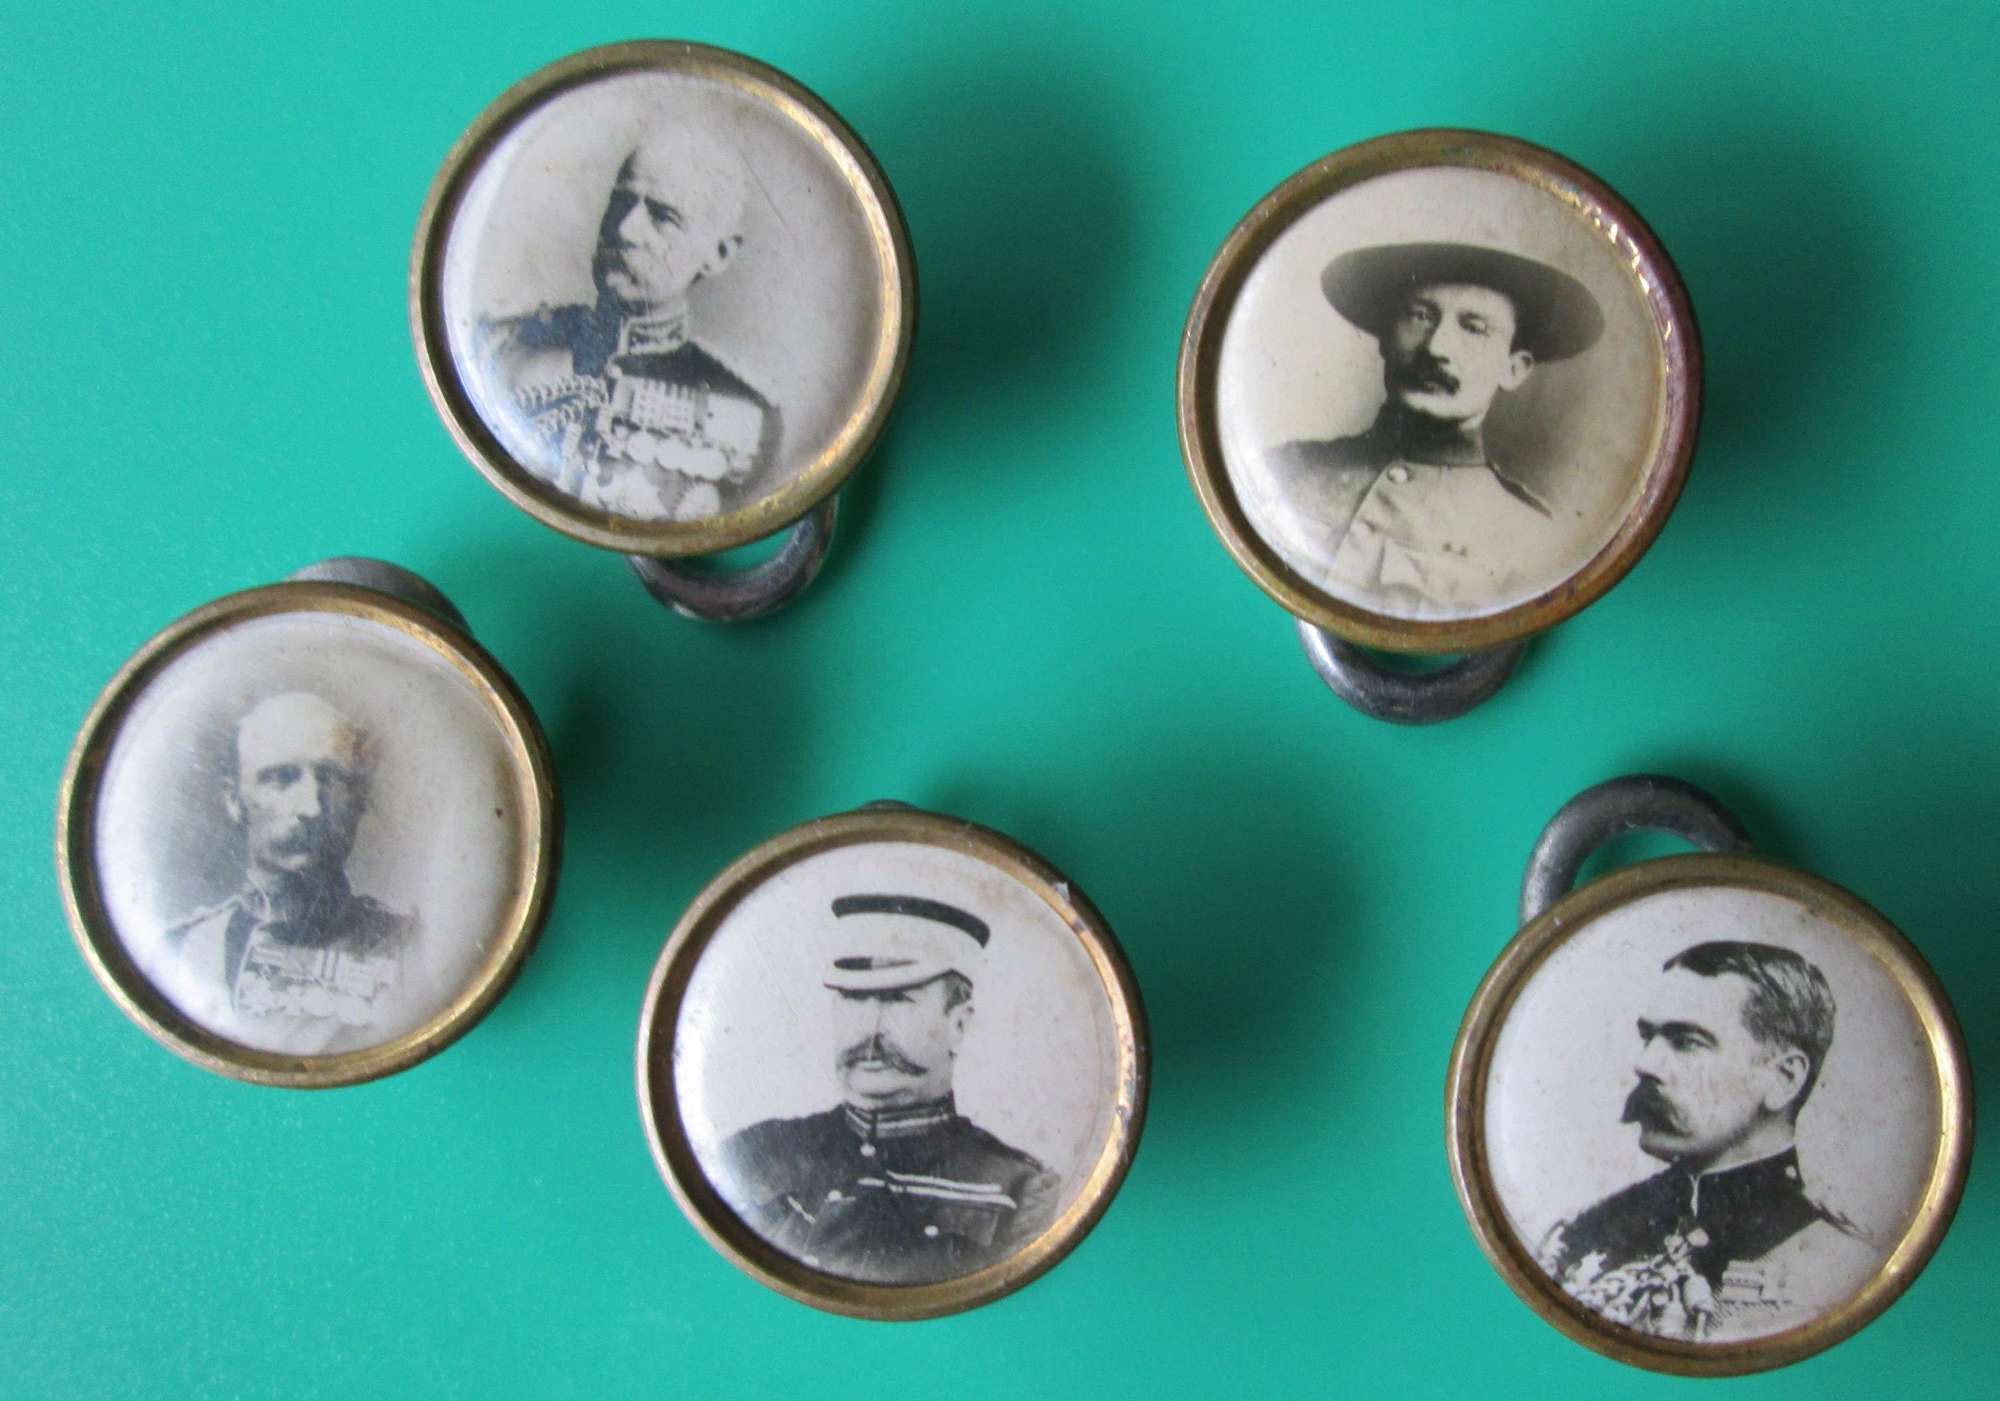 A COLLECTION OF BOER WAR BUTTONS